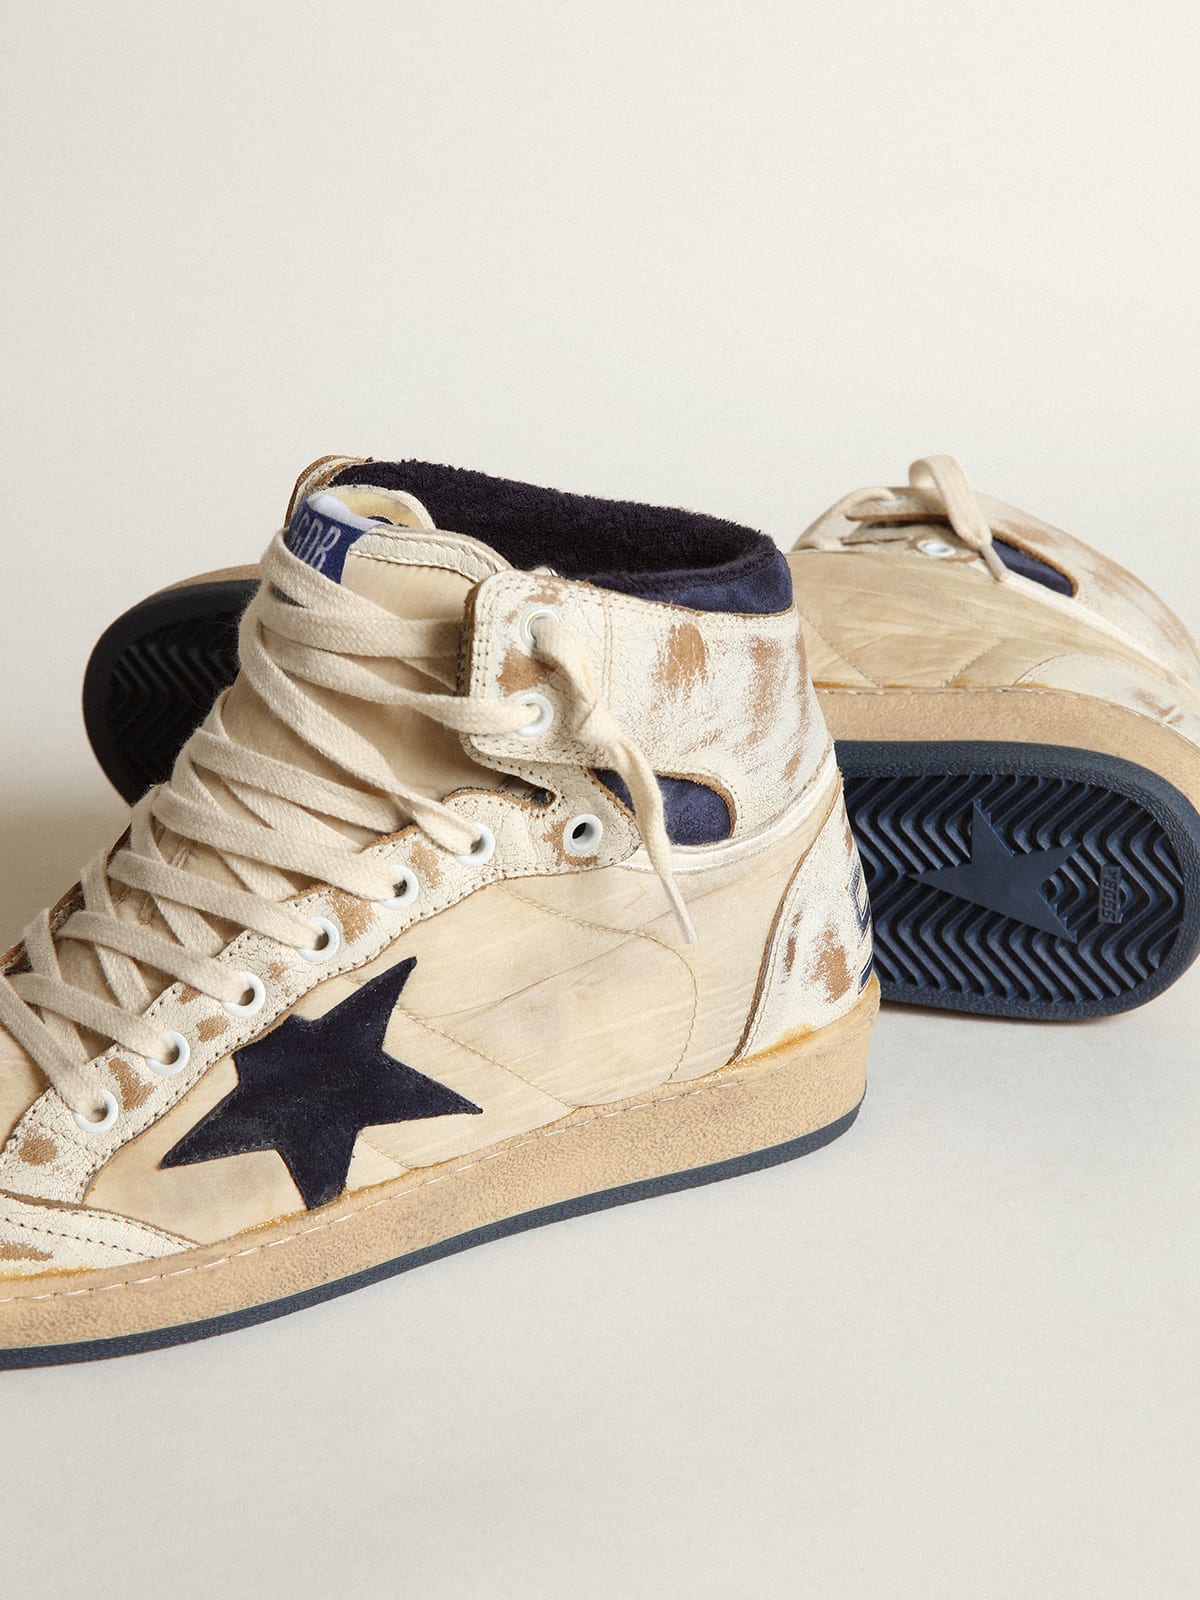 Golden Goose - Men's Sky-Star in cream-colored nylon and leather with blue suede star in 